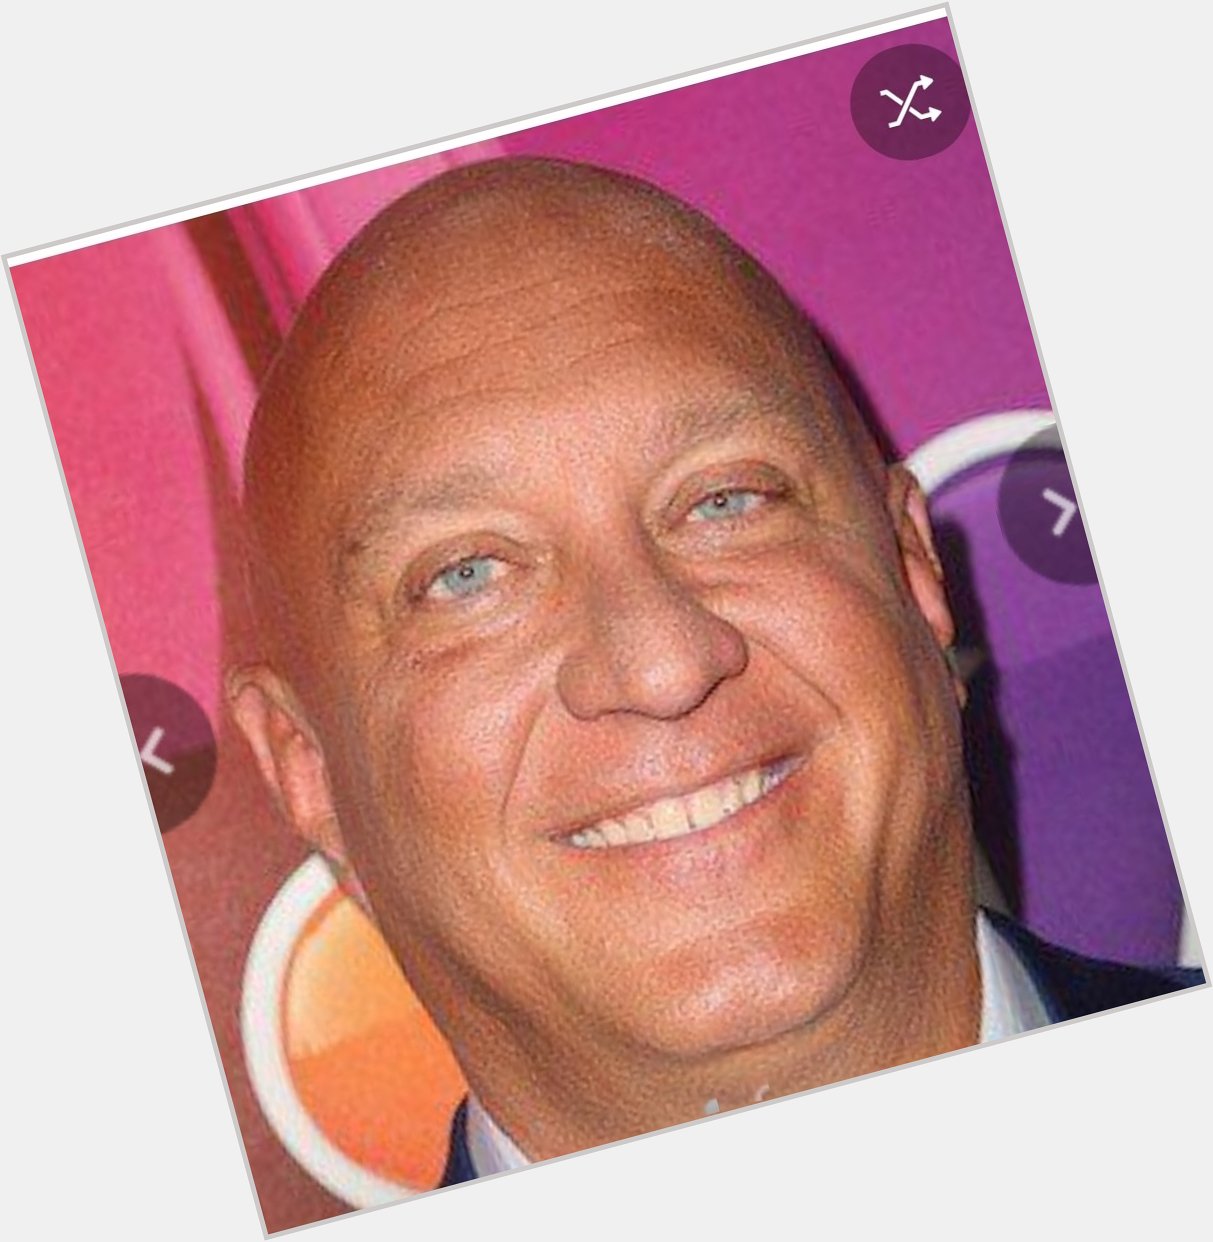 Happy birthday to a great TV host and former police officer. Happy birthday to Steve Wilkos 